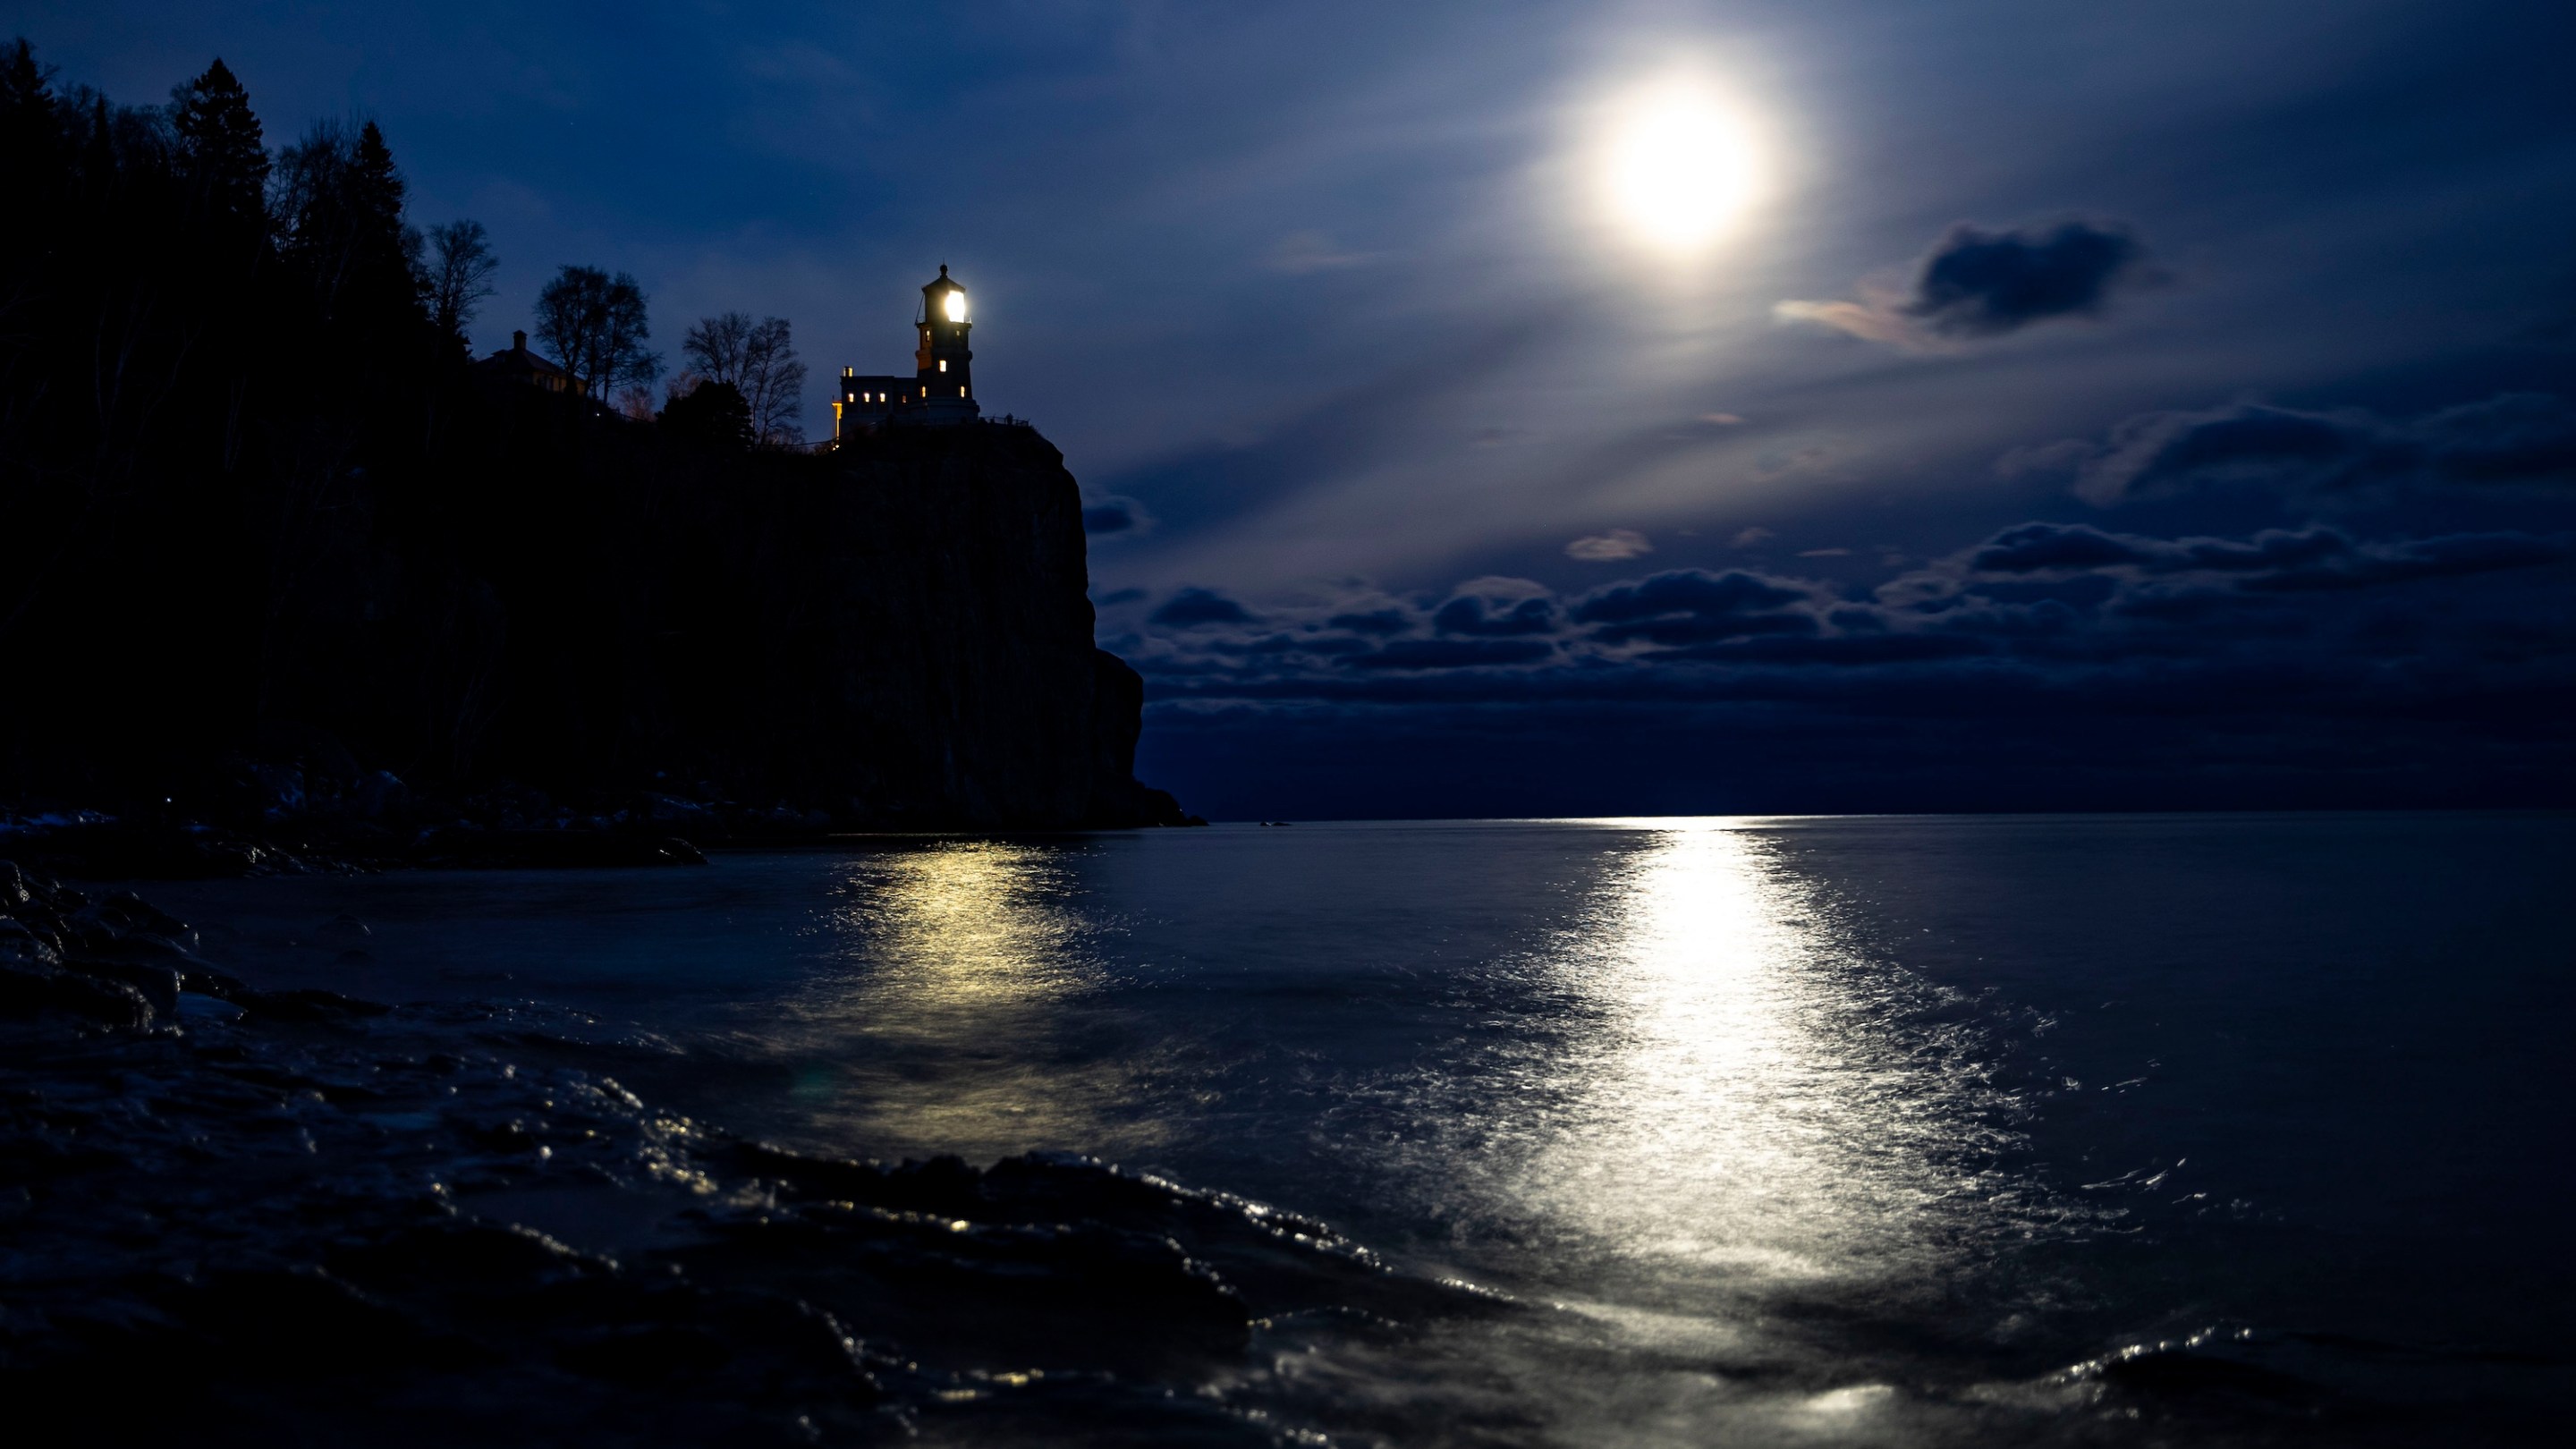 TWO HARBORS, MN - NOVEMBER 9: A bright moon shone over the horizon near the Split Rock Lighthouse on November 10, 2019. It was lit to honor the lives of the 29 men that died aboard the Edmund Fitzgerald 44 years ago. The lighthouse is only lit for approximately two hours and fifteen minutes each year. (Photo by Alex Kormann/Star Tribune via Getty Images)